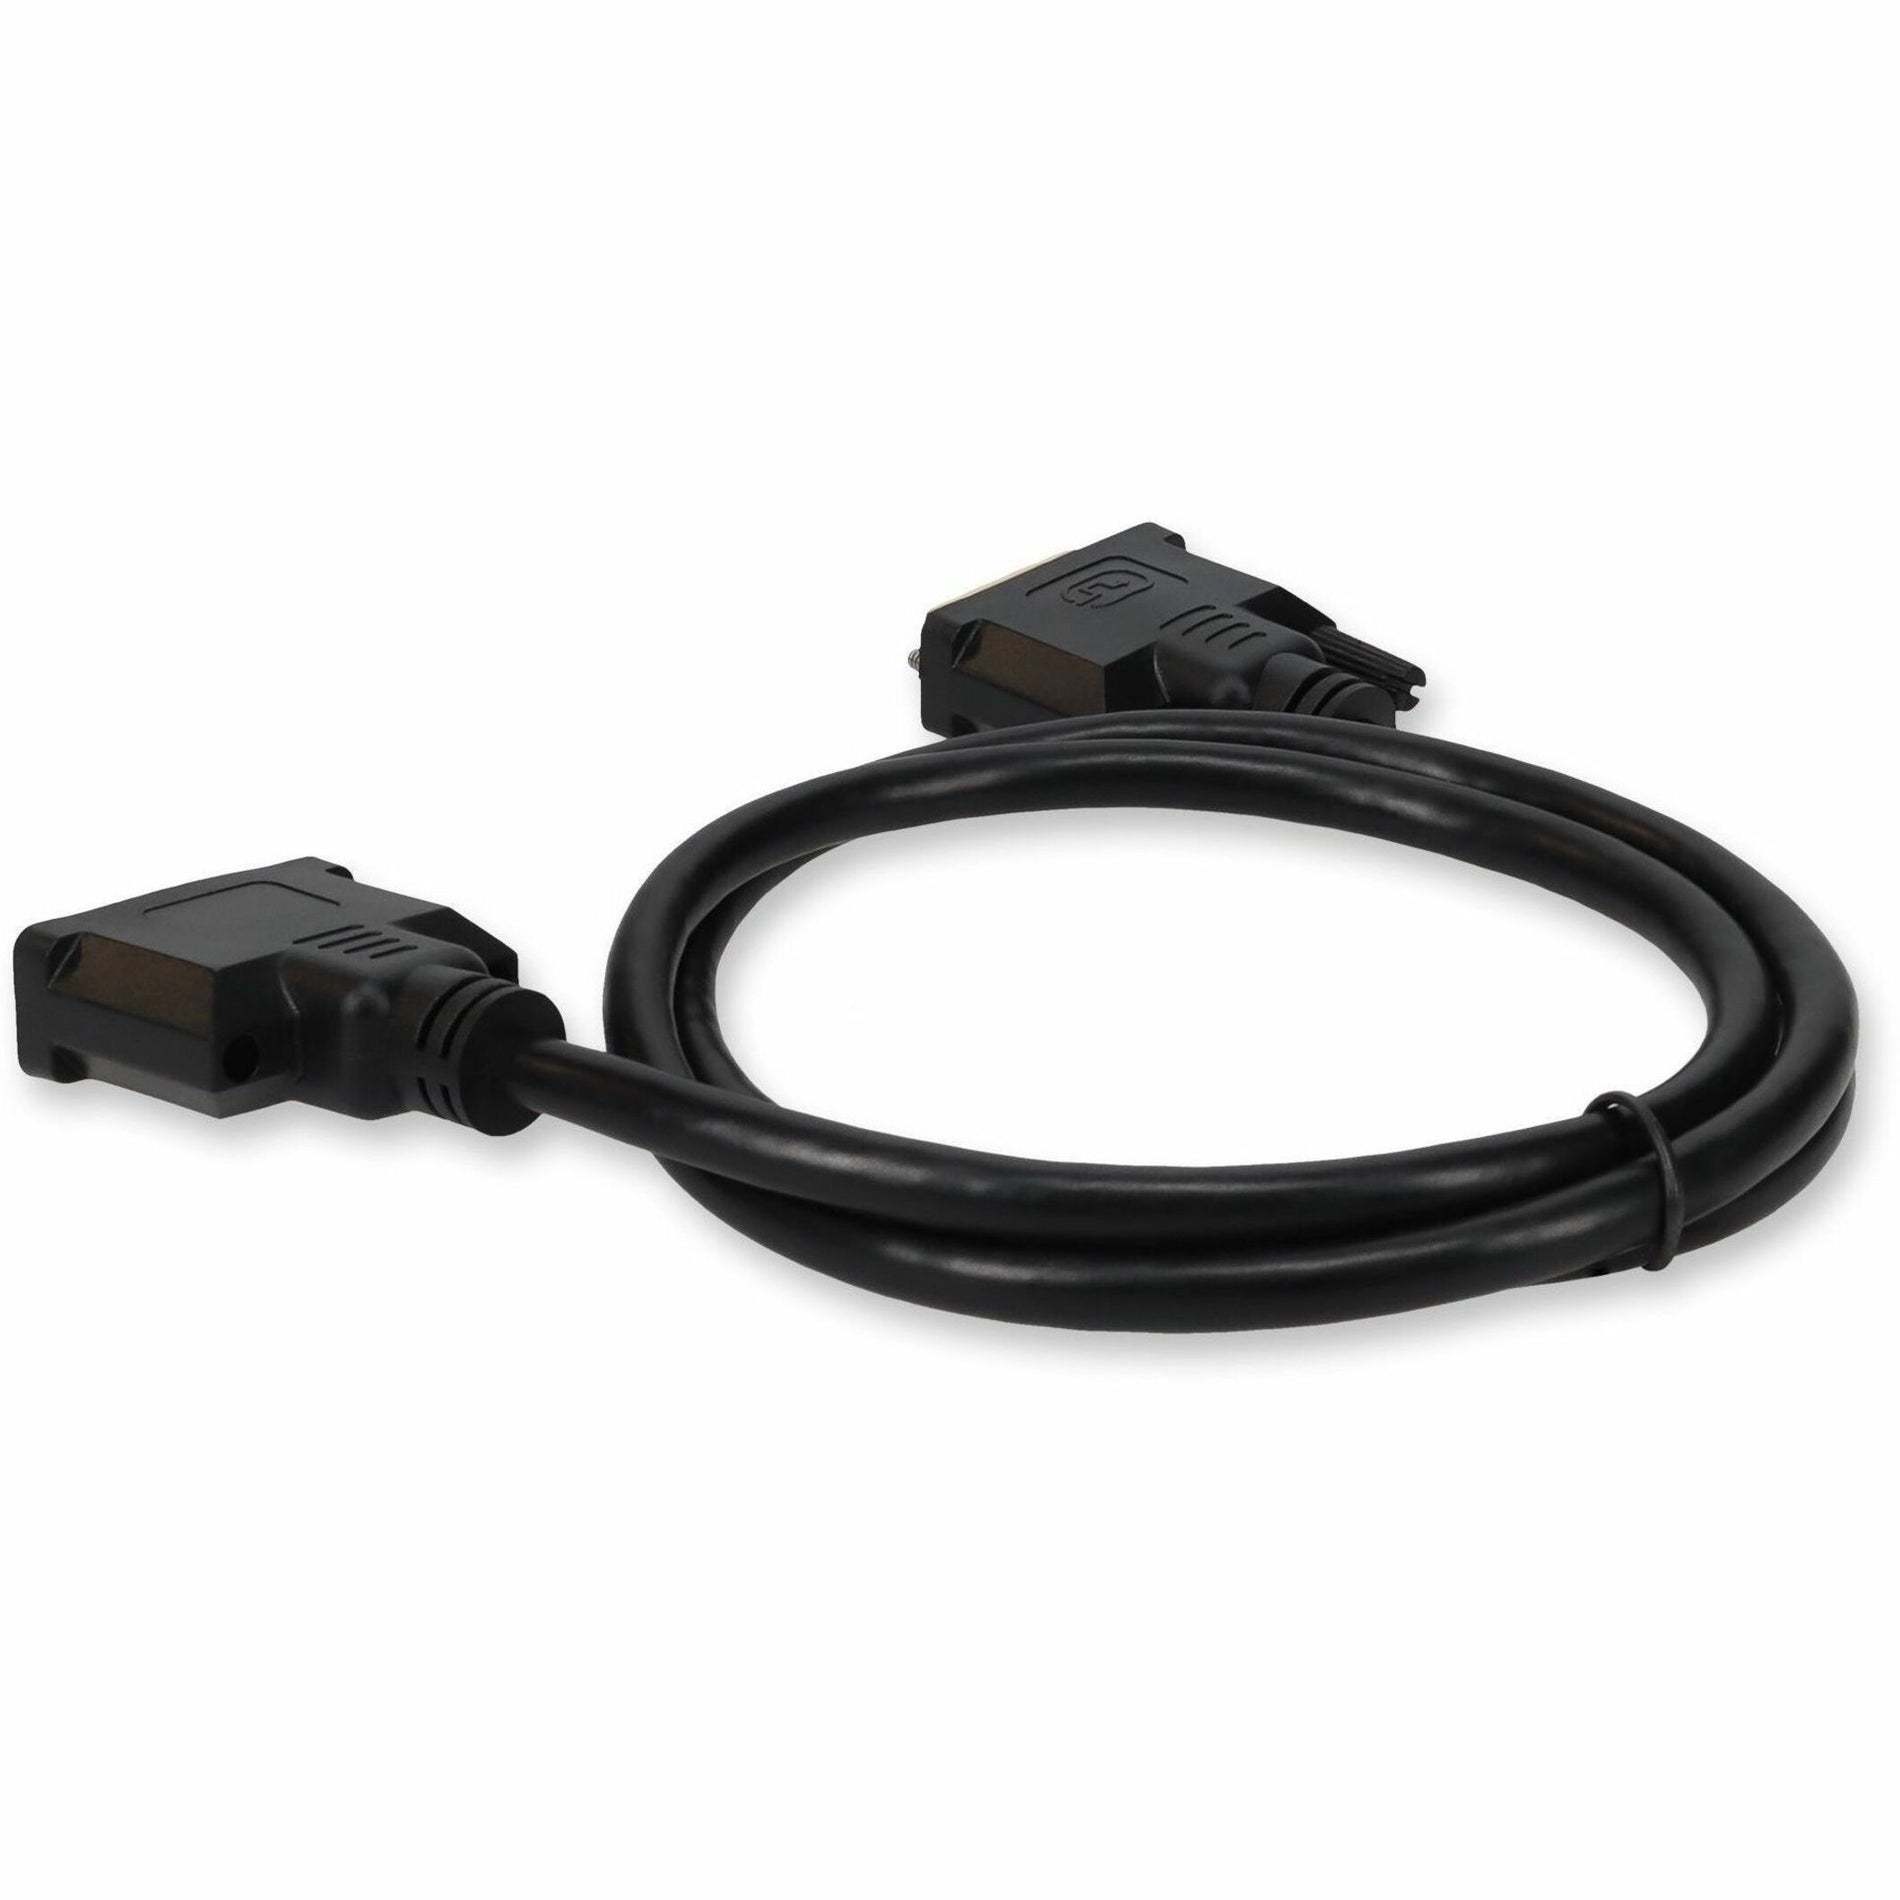 AddOn DVID2DVIDDL6F 6ft (1.8M) DVI-D to DVI-D Dual Link Cable - Male to Male, High-Quality Video Transmission